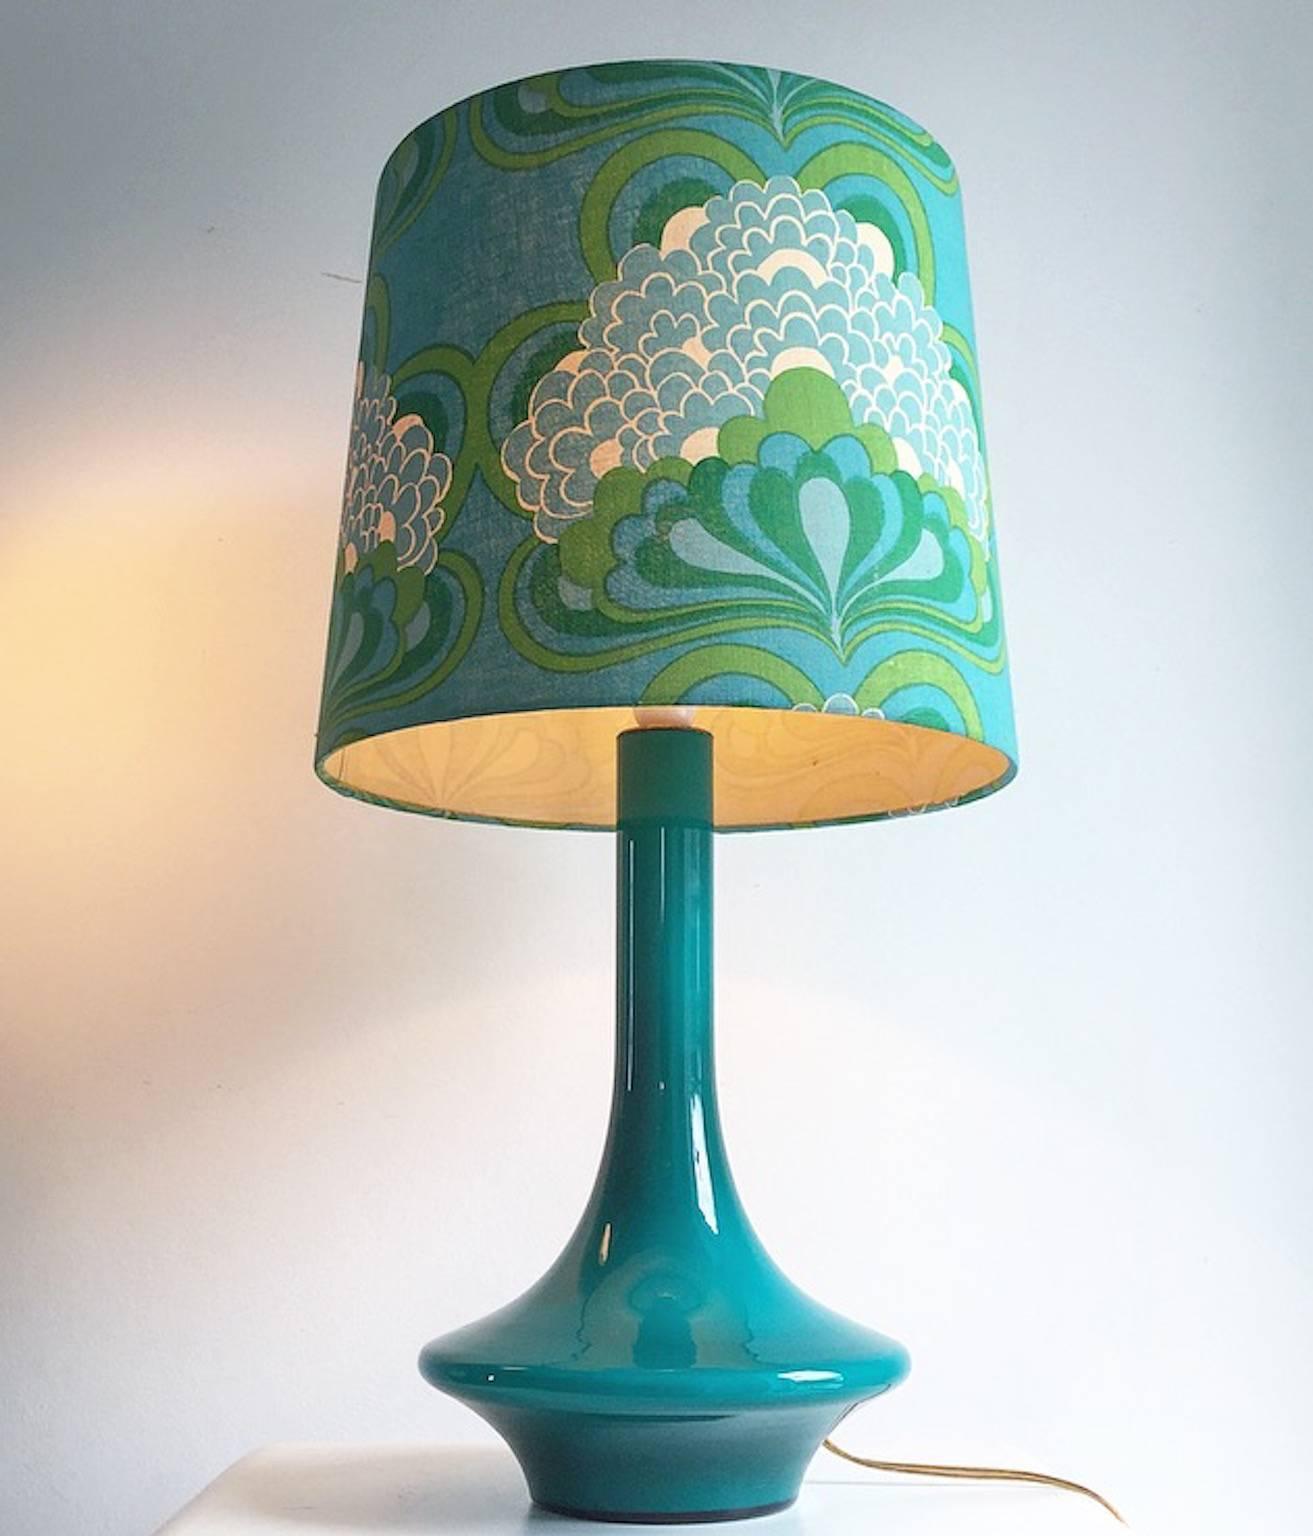 Amazing and rare colorful glass table lamp from Sweden attributed to Orrefors glass, early 1970s.

Both the lamp and the shade have a range of green and turquoise colors. The shade is original bought together with the lamp.

A beautiful